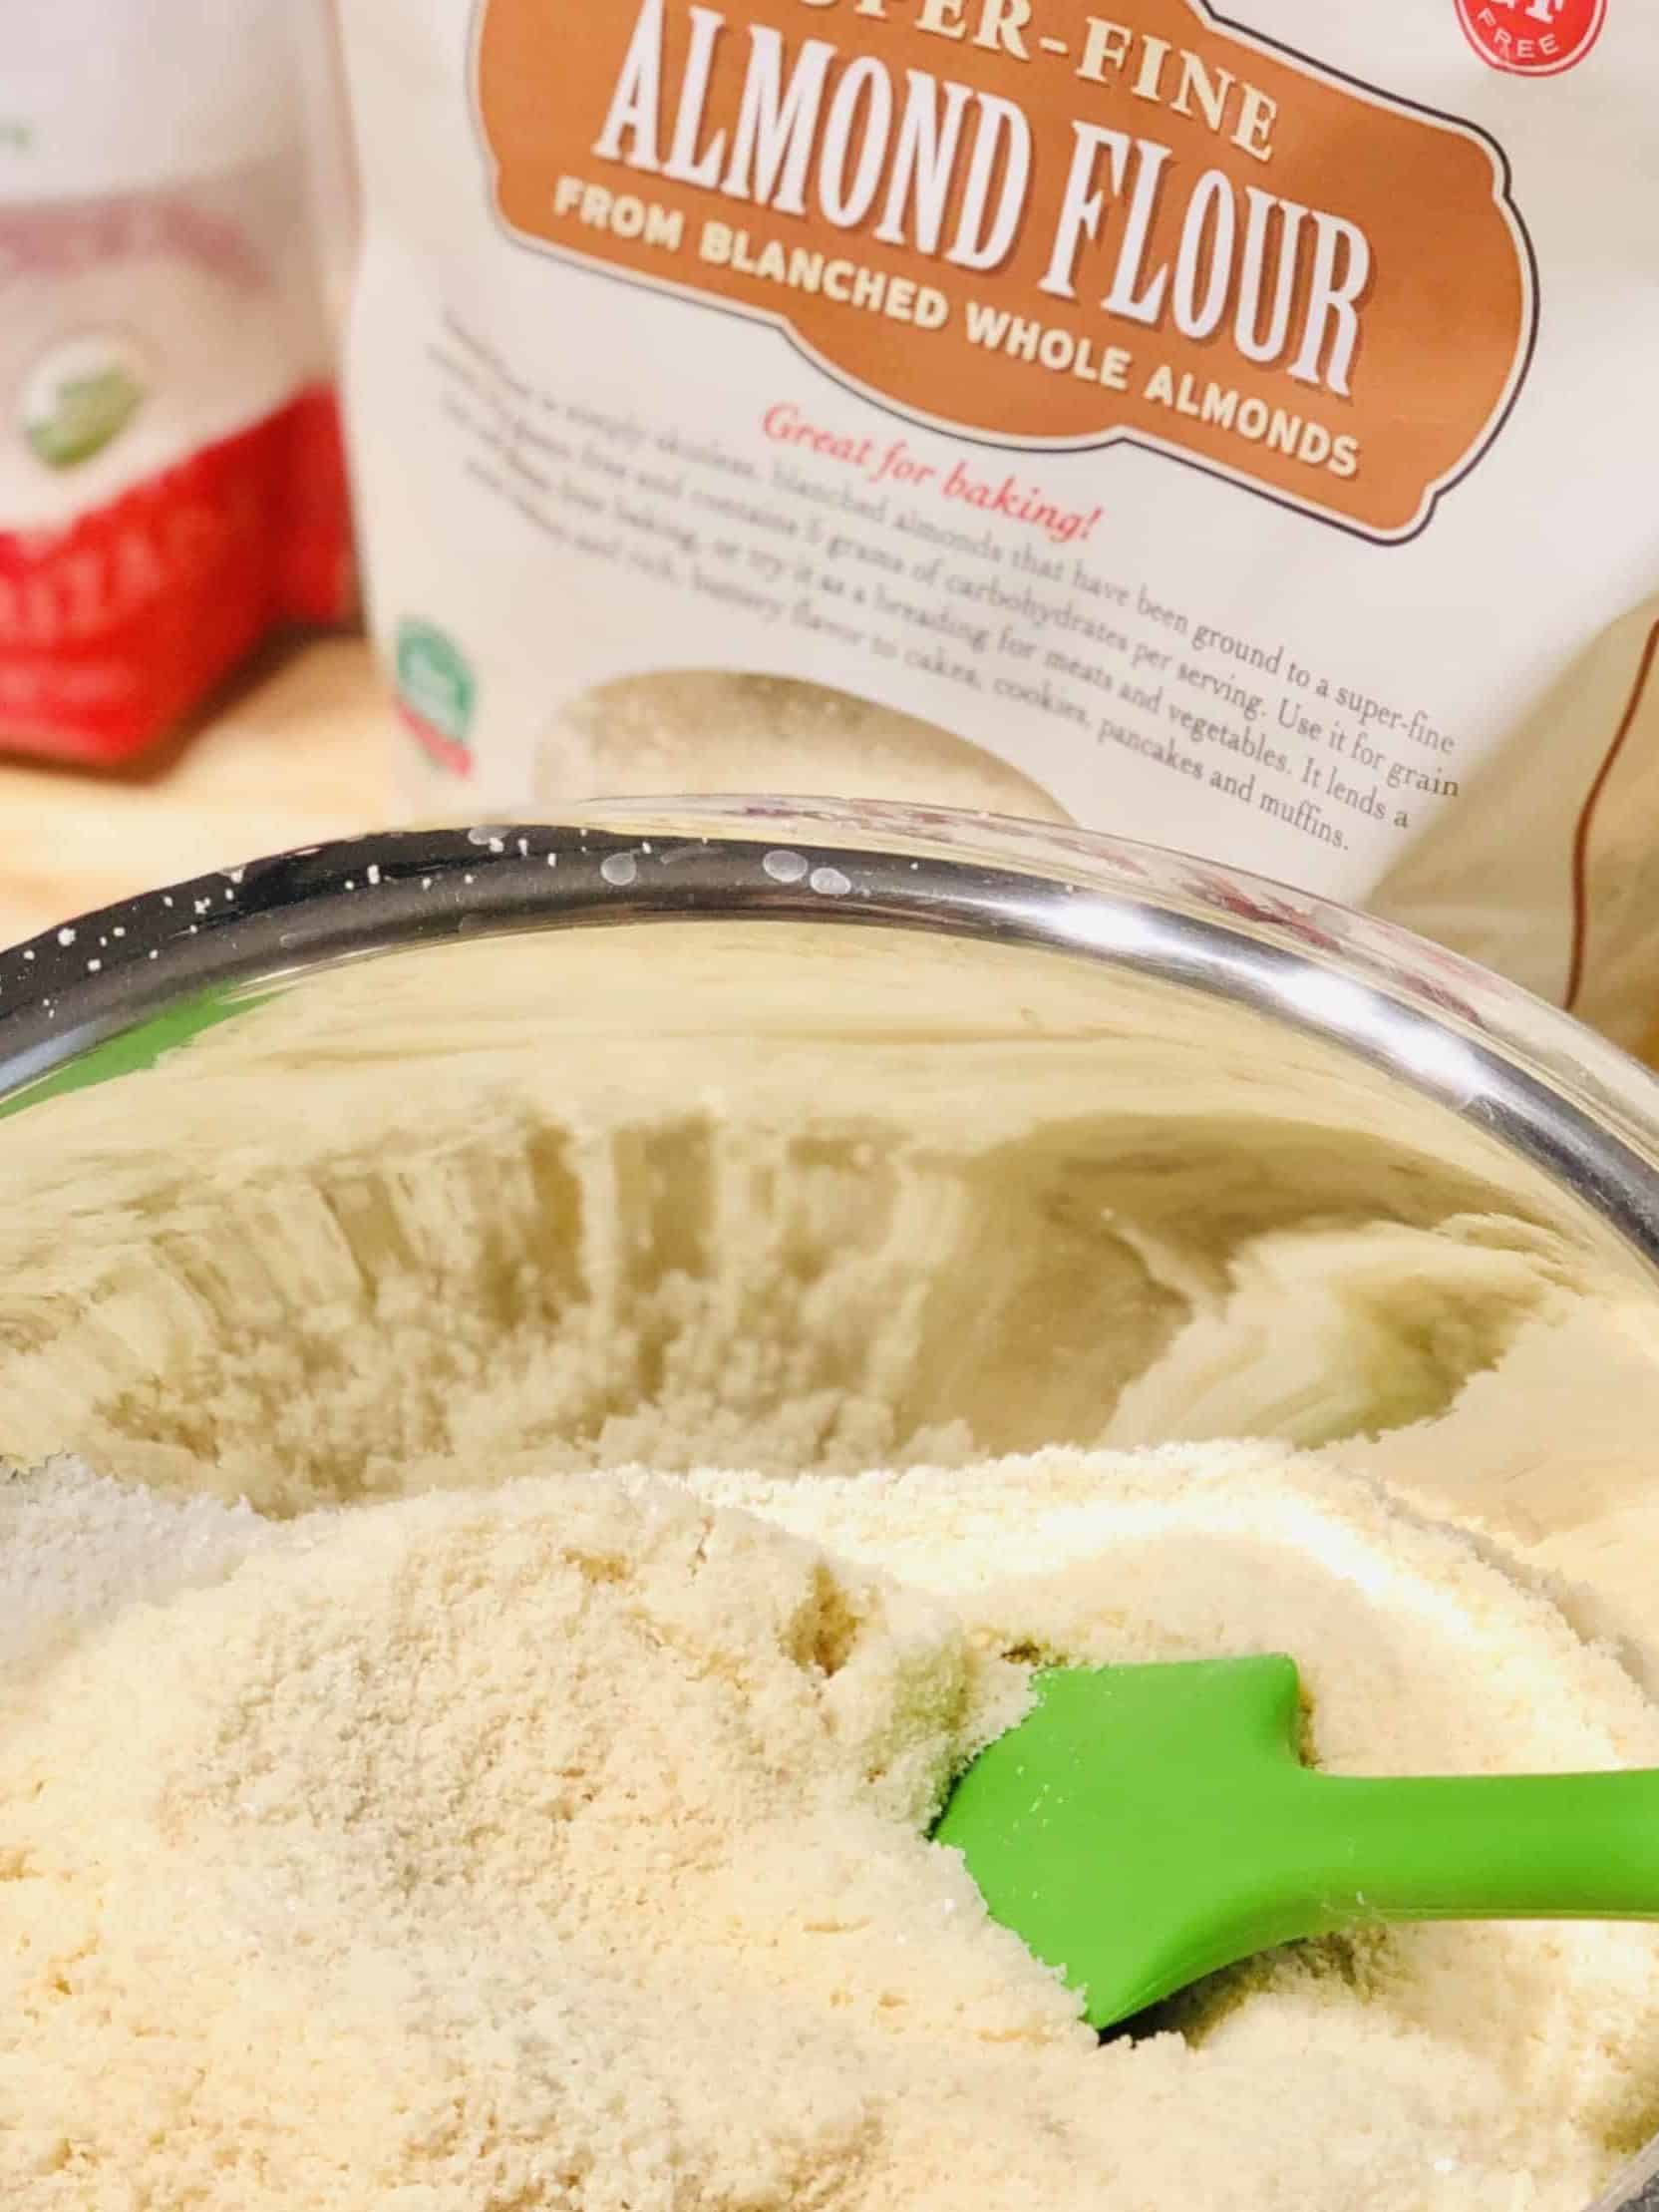 A stainless steel mixing bowl full of almond flour with a green silicone spatula in it. A bag of almond flour sits behind it.